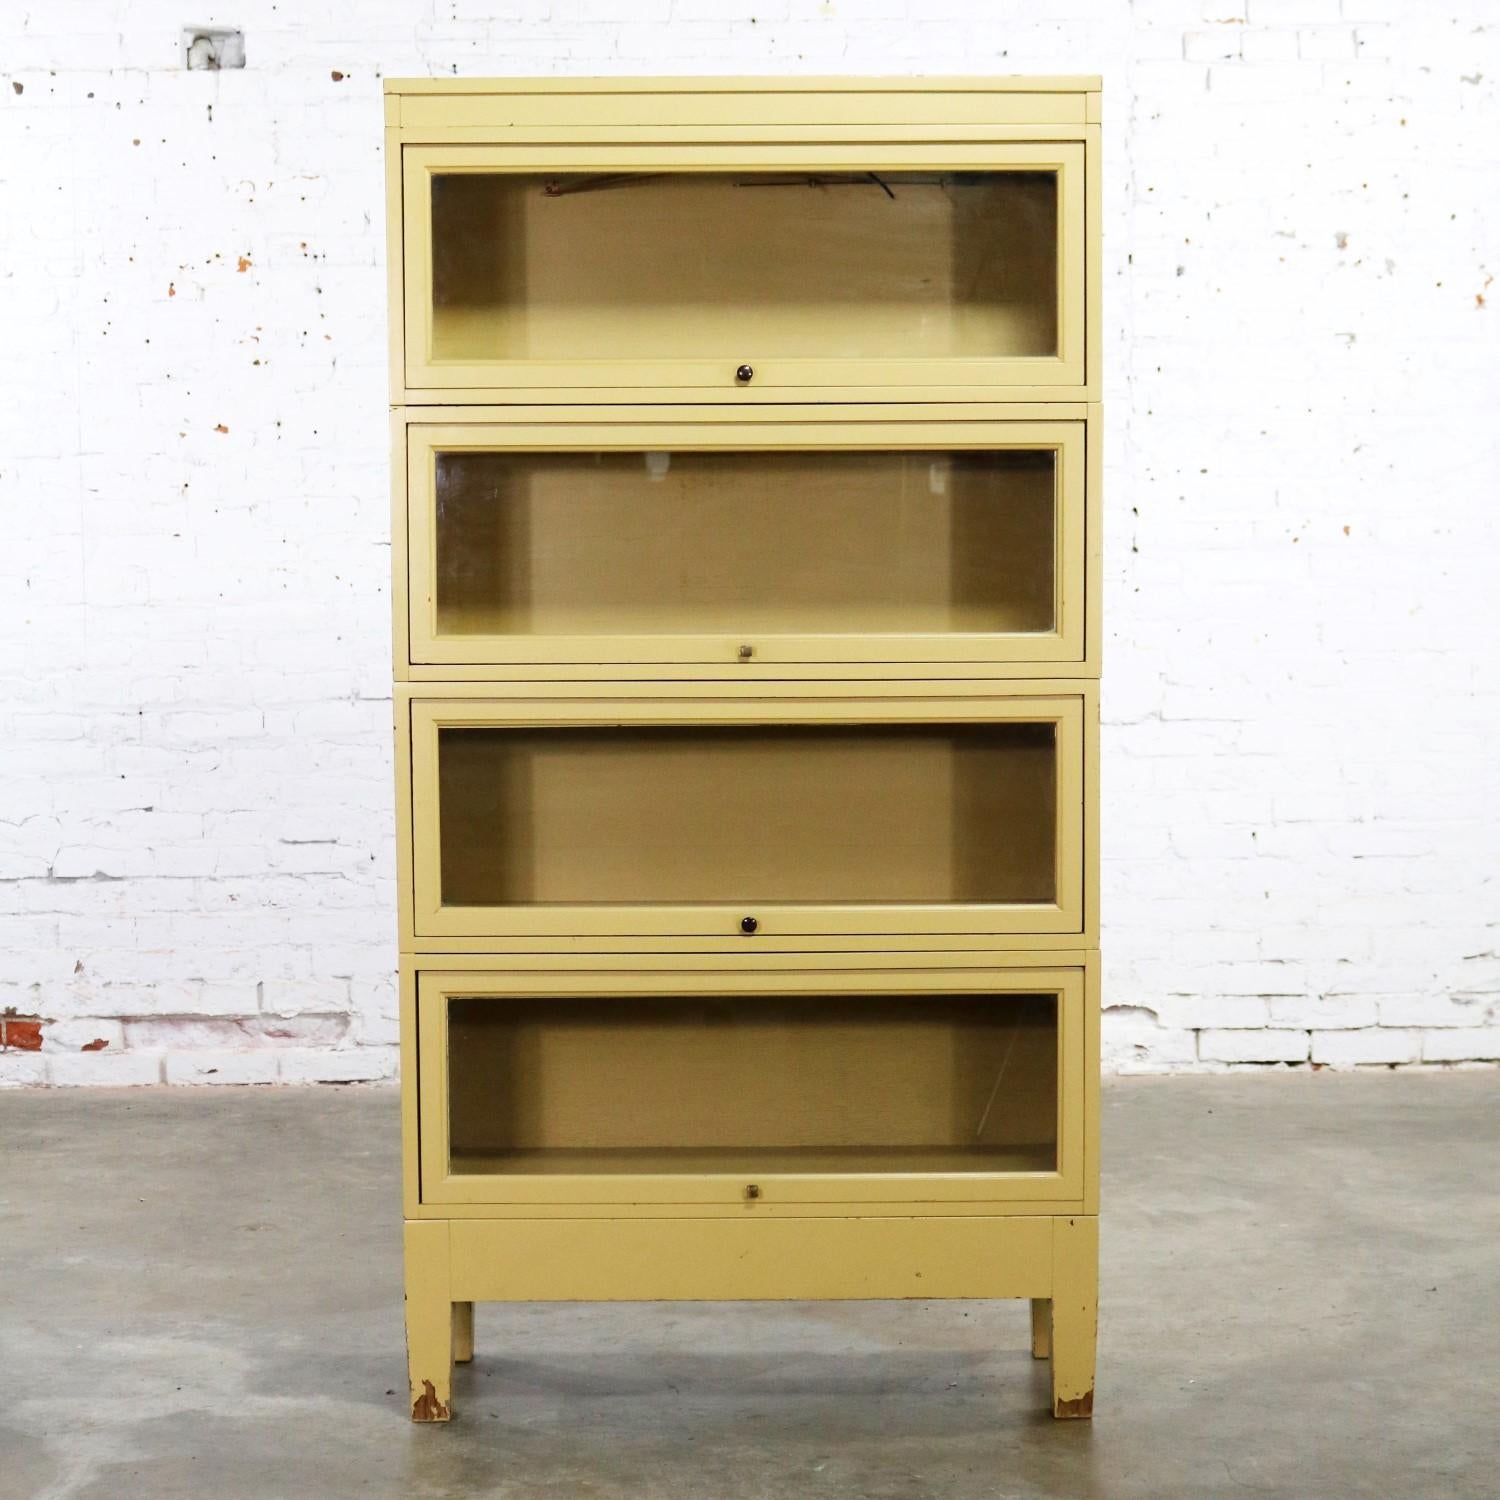 Handsome vintage Globe Wernicke Industrial stacking barrister bookcase with a distressed golden yellow painted finish to the wood cases and wood framed glass doors. There are four separate cases, a top, and a bottom. They are in wonderful vintage